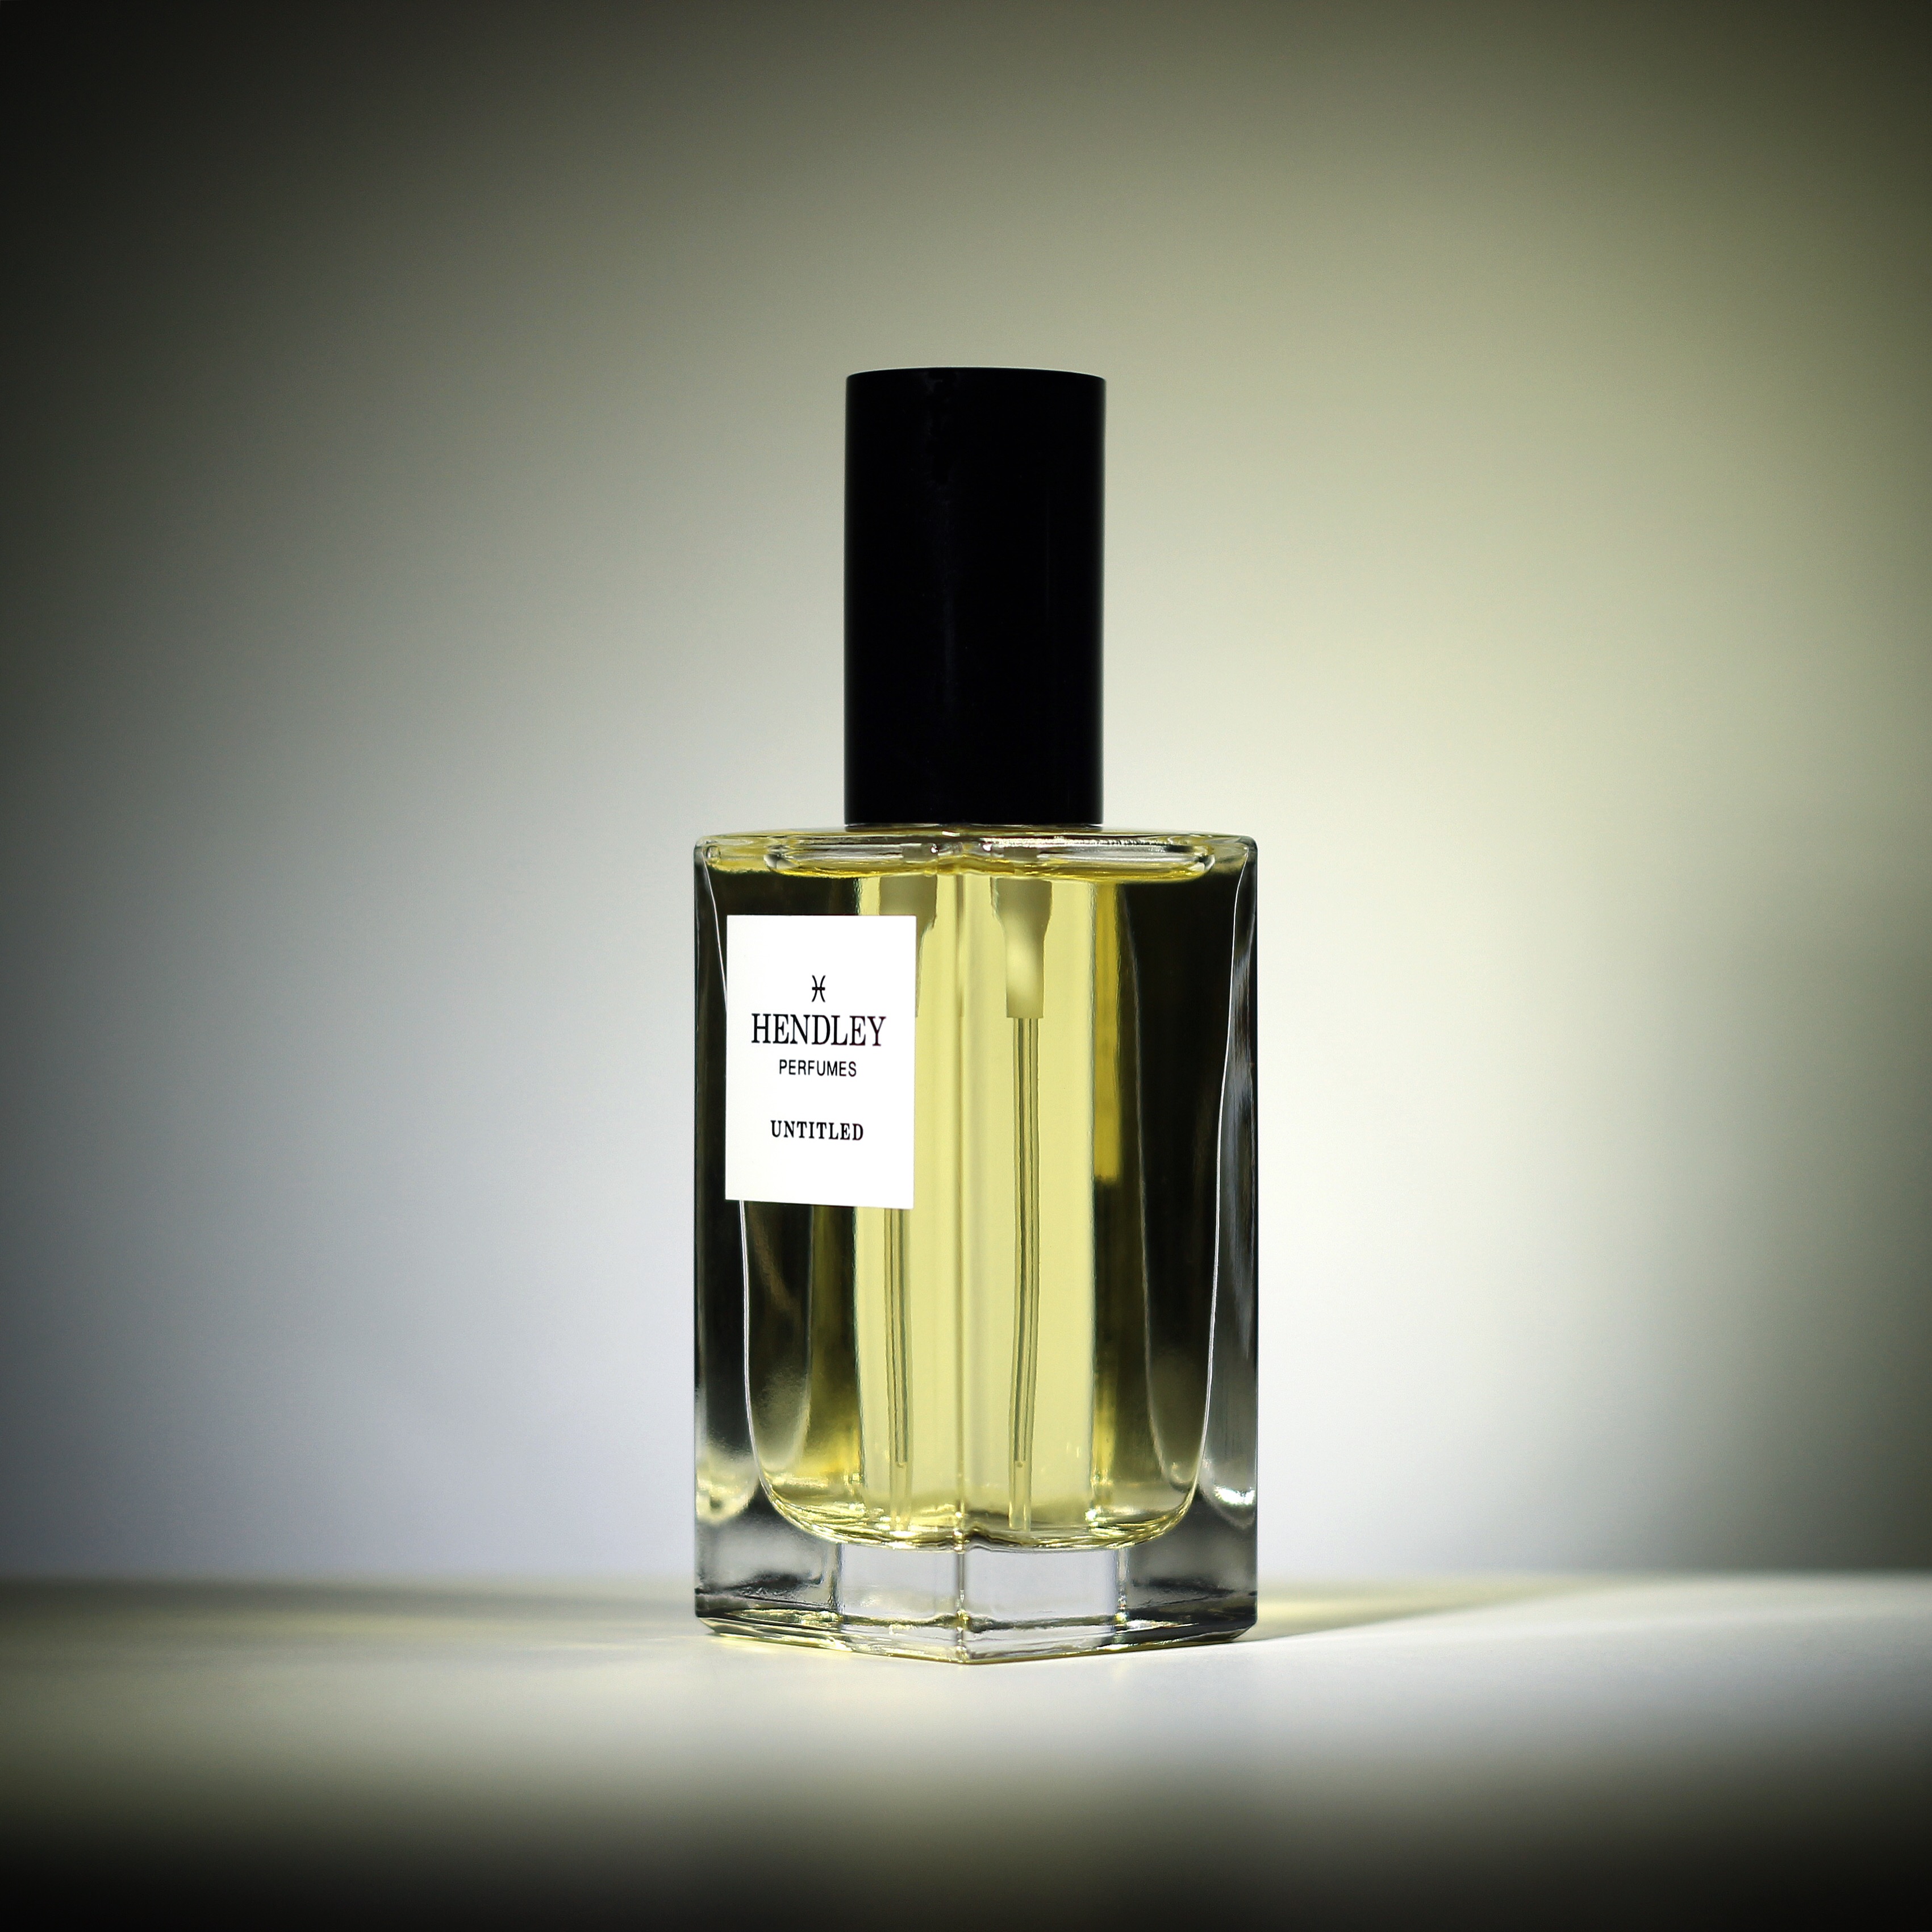 Untitled Hendley Perfumes perfume - a fragrance for women and men 2019